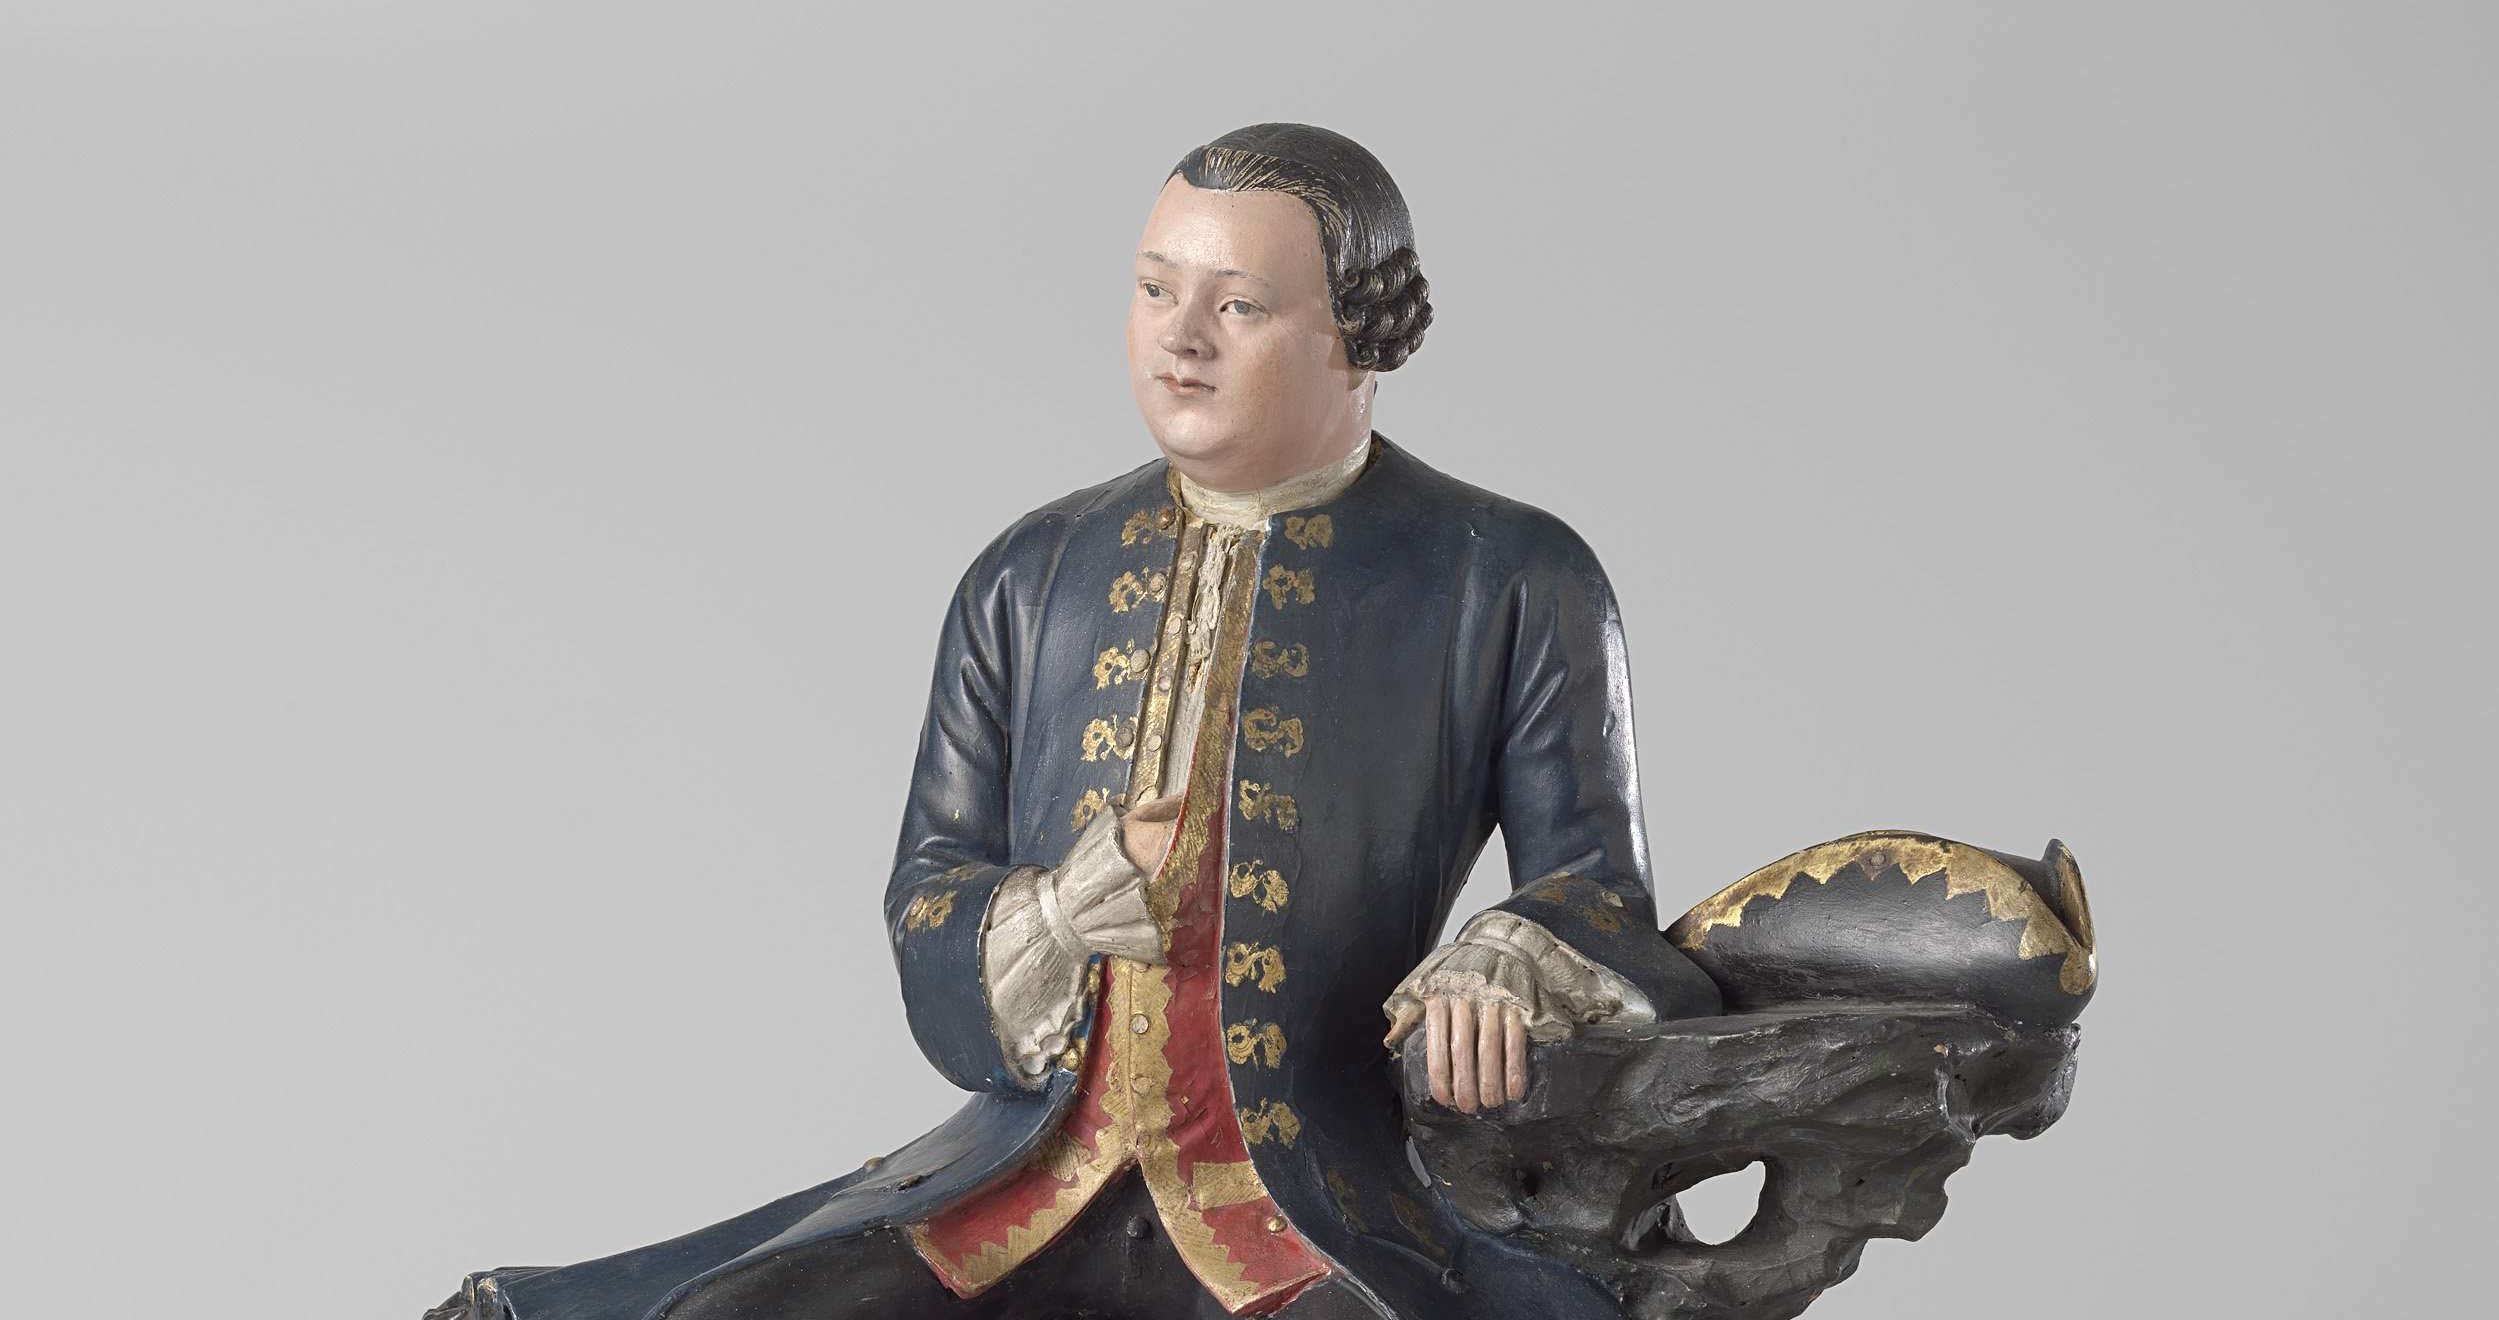 a porcelain figure of a man sitting down, wearing a long blue jacket with gold trim and gold tassels, his hair slicked back and ending in Victorian-style ruffles